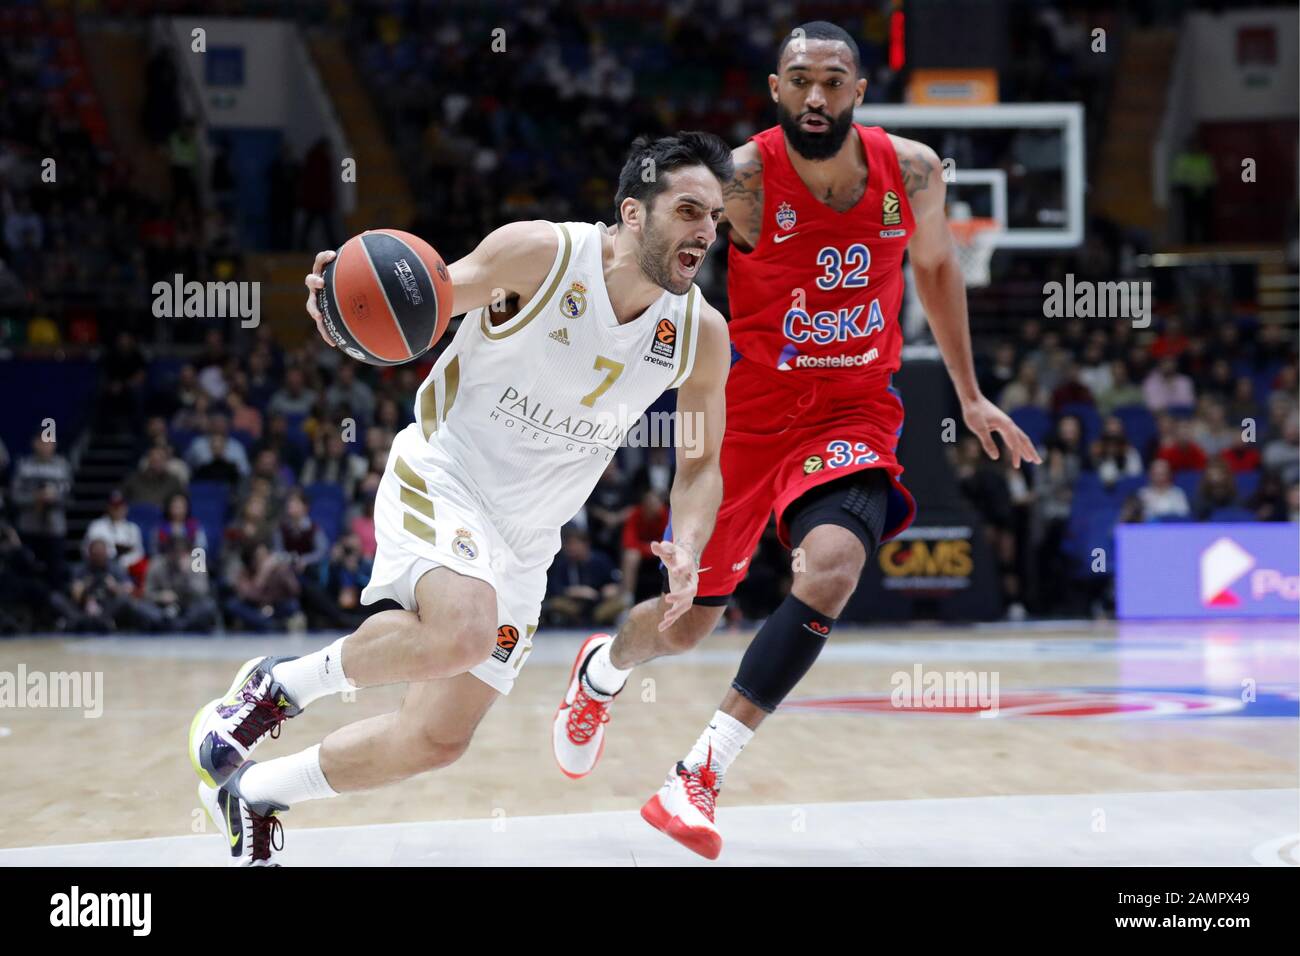 Moscow, Russia. 14th Jan, 2020. MOSCOW, RUSSIA - JANUARY 14, 2020: Real  Madrid's Facundo Campazzo (L) and CSKA Moscow's Darrun Hilliard in action  in the 2019/20 Euroleague Regular Season Round 19 basketball